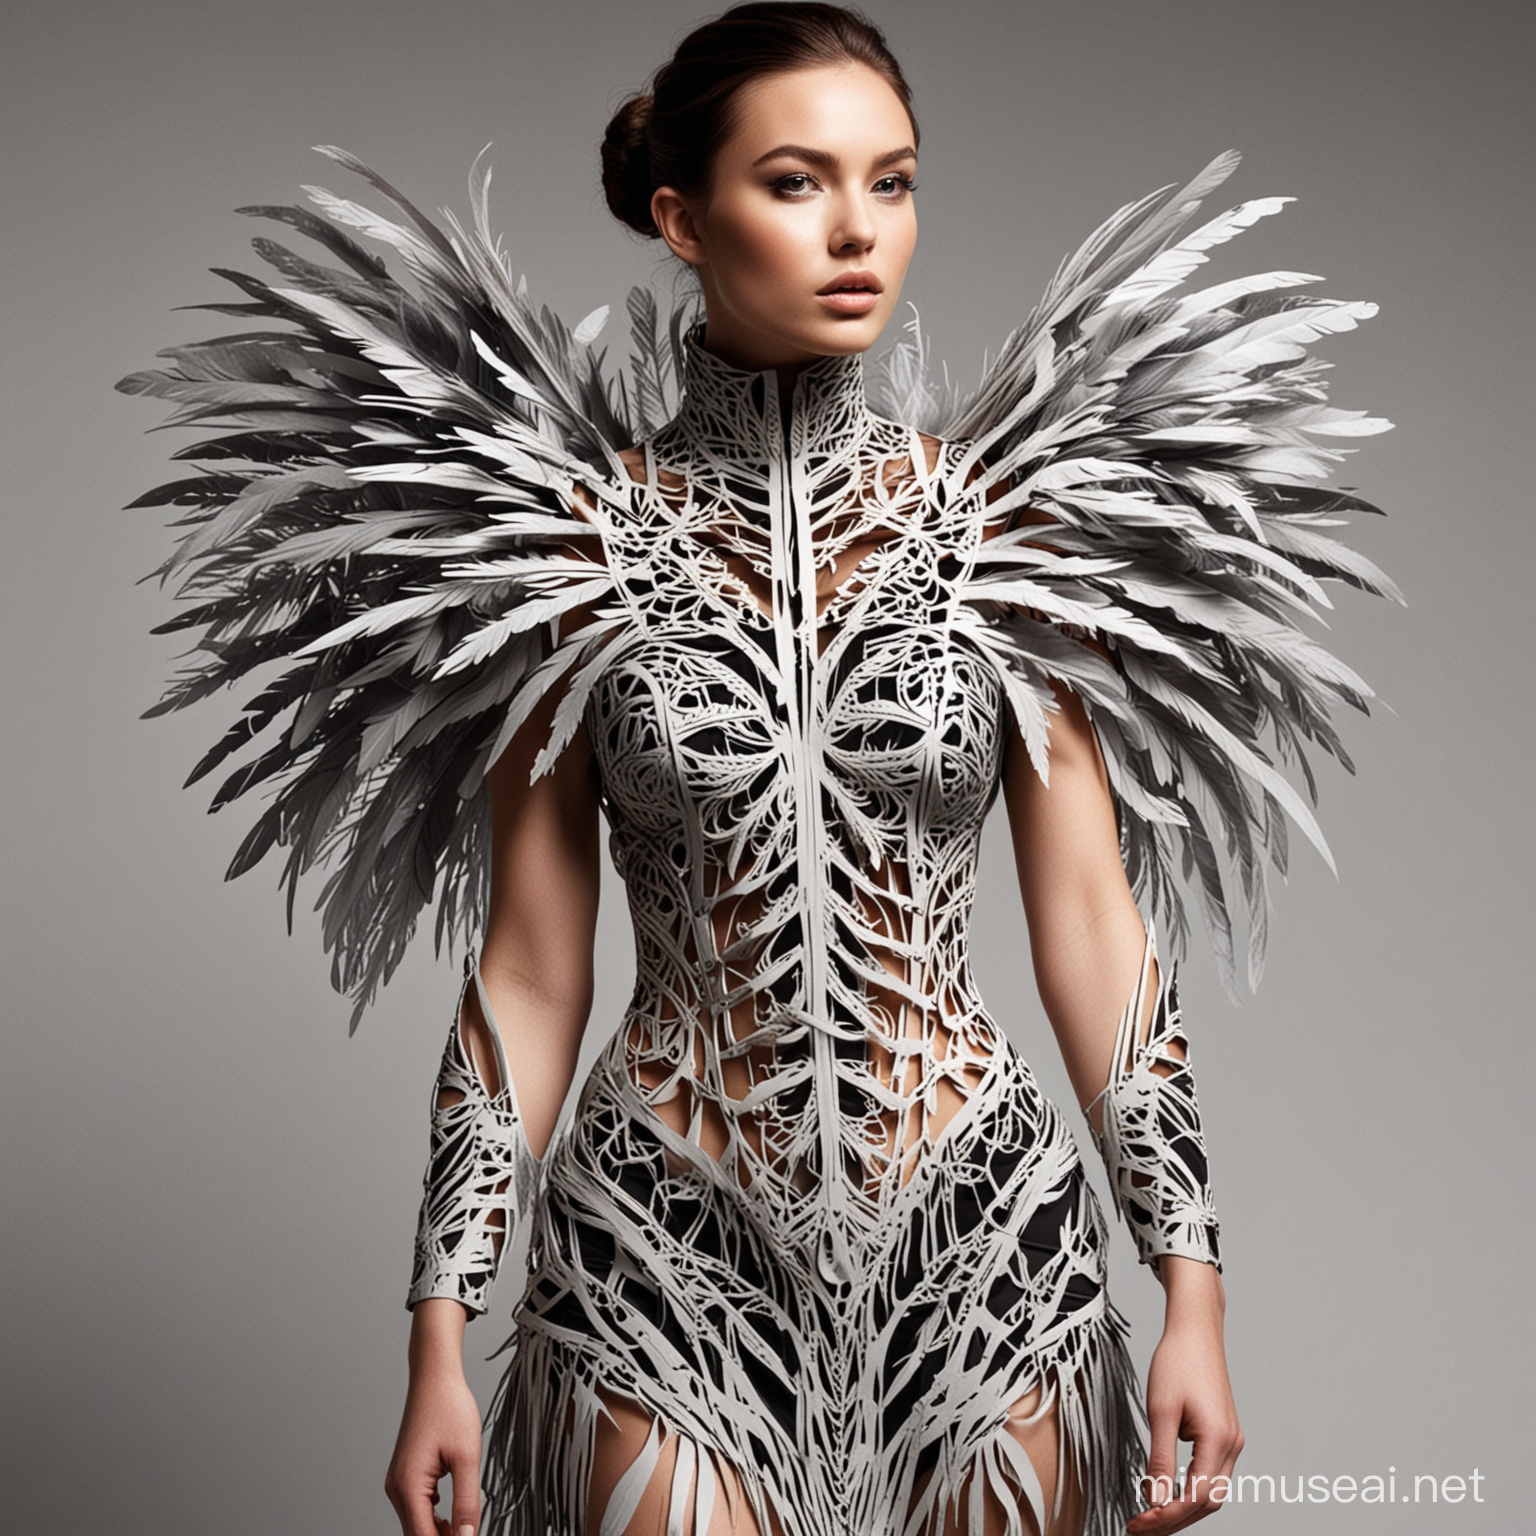 create an full avant garde wearable art inspired by laser cut structural in some part of body and feathers look